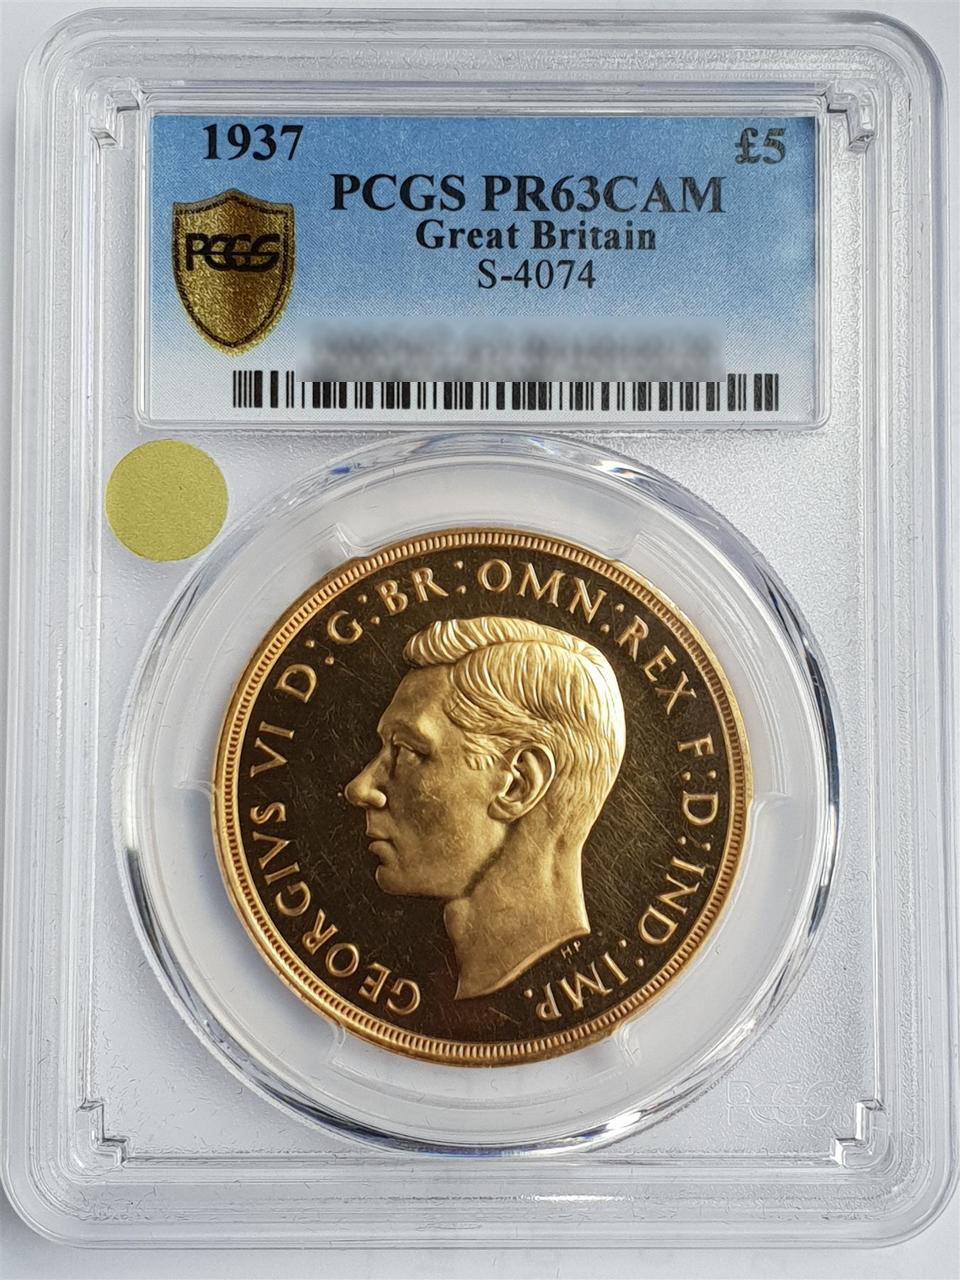 A 1937 George VI £5 gold coin, encapsulated by PCGS